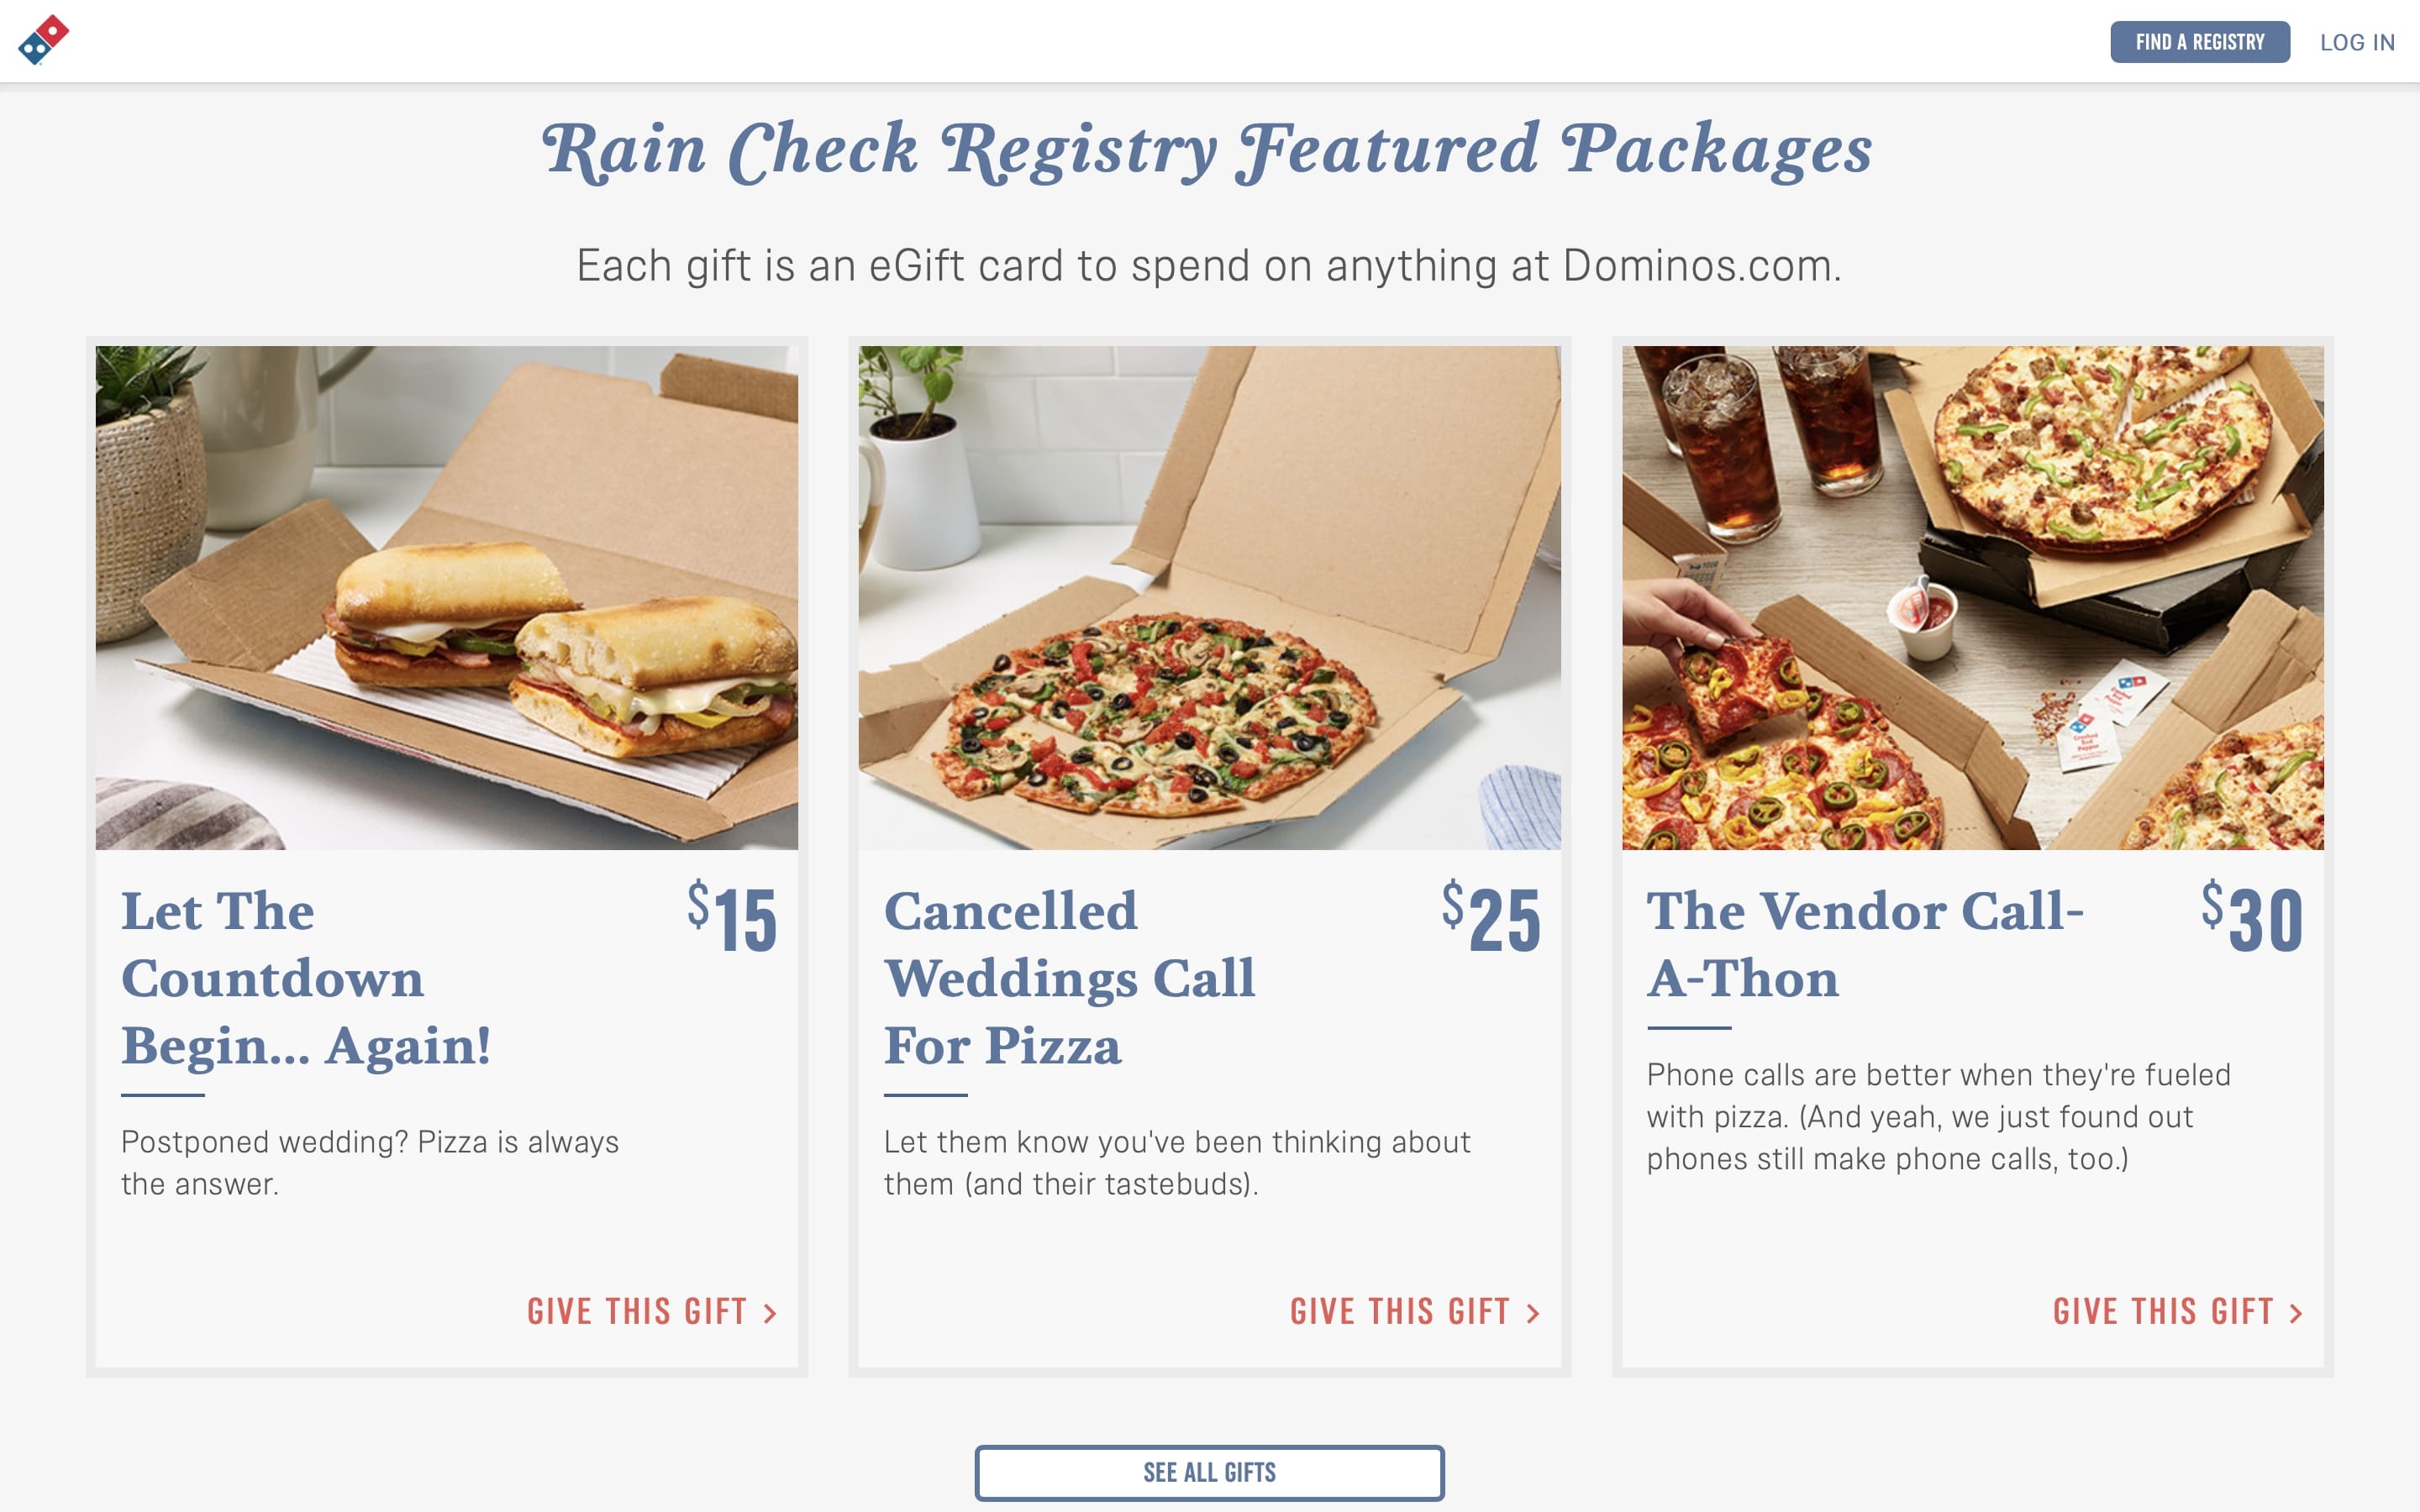 soon-to-get-married couples can create their pizza registry